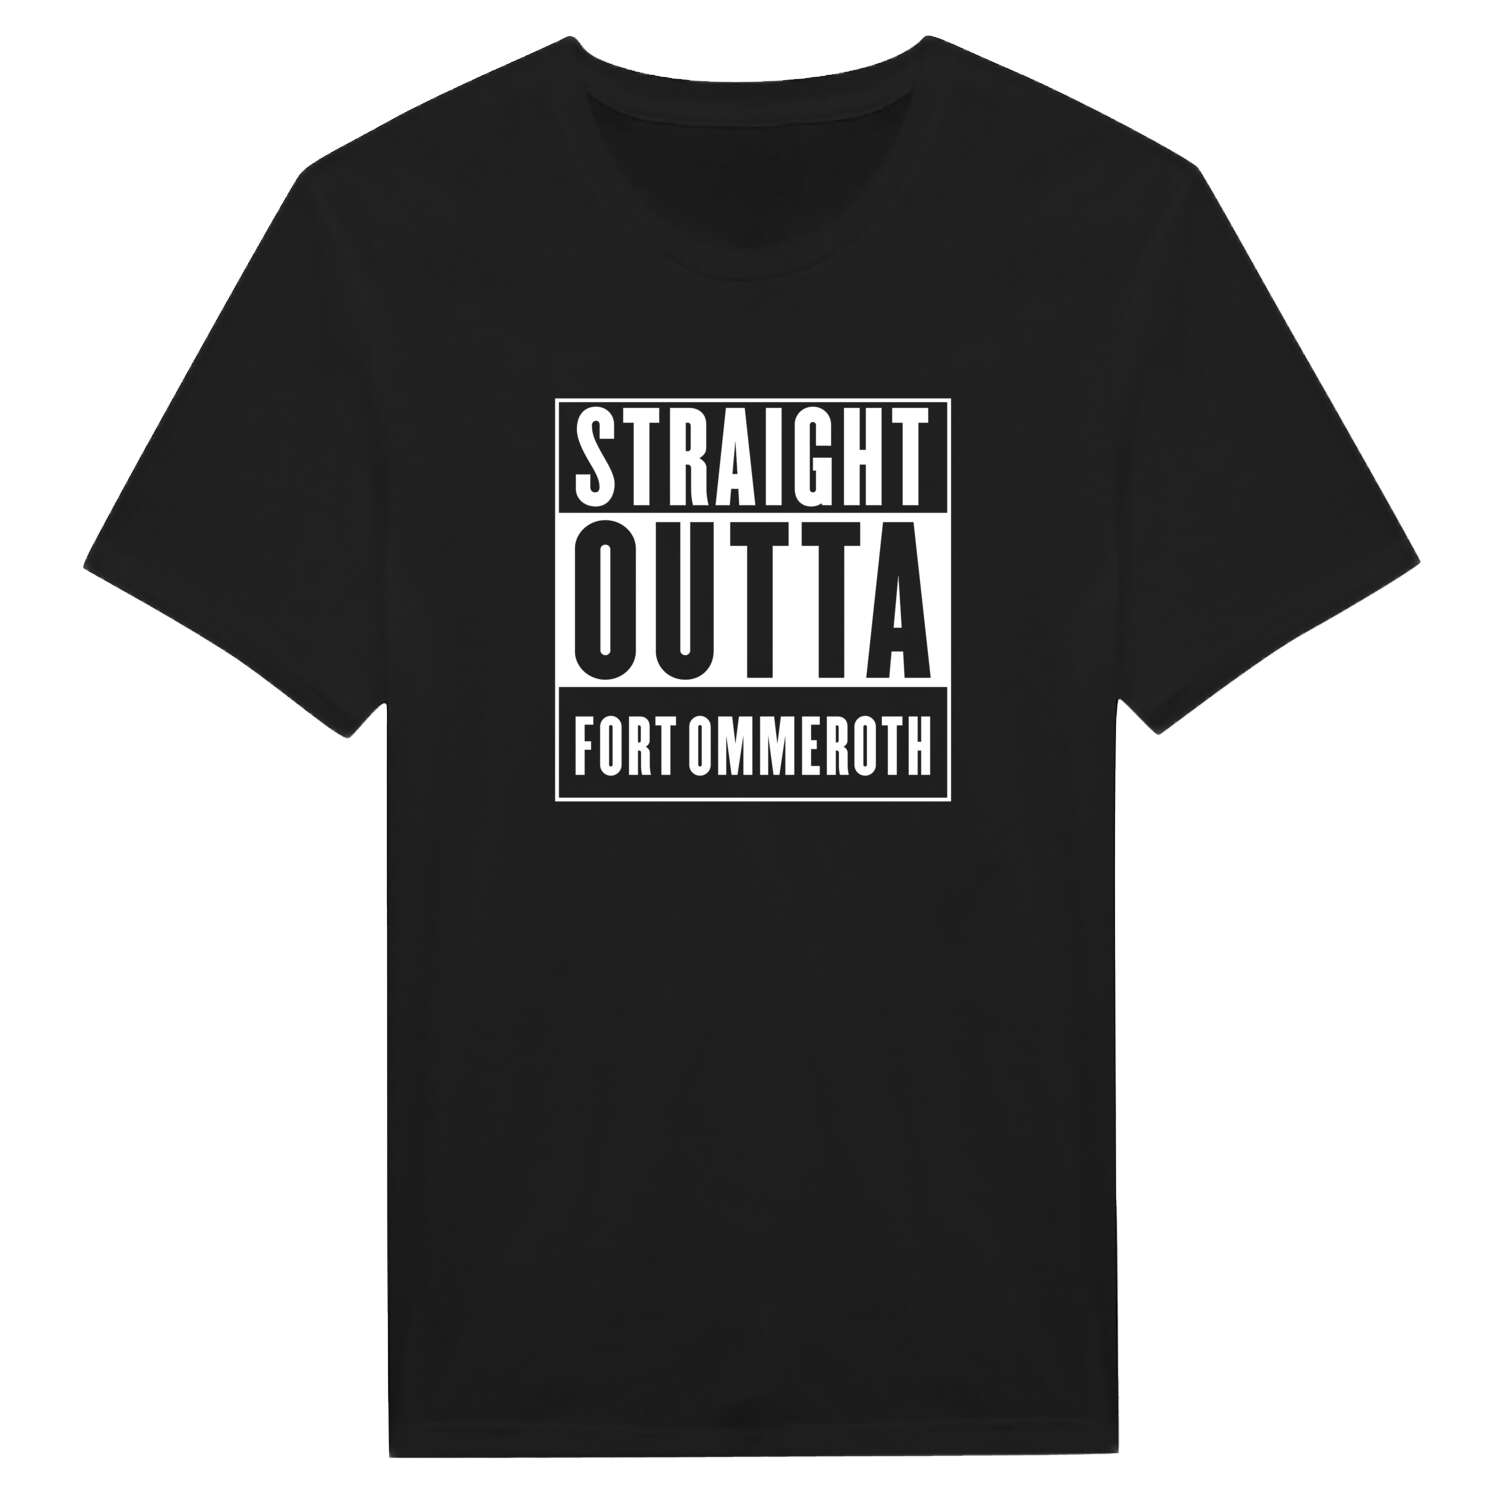 Fort Ommeroth T-Shirt »Straight Outta«